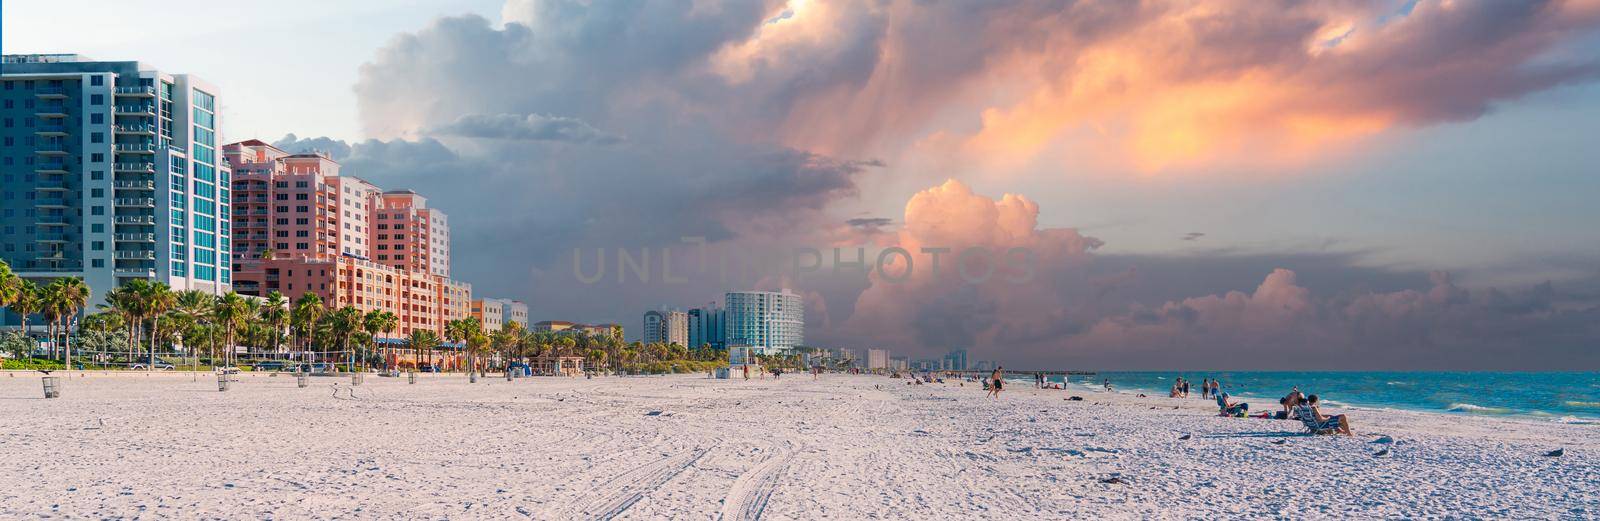 Clearwater beach with beautiful white sand in Florida USA by Mariakray